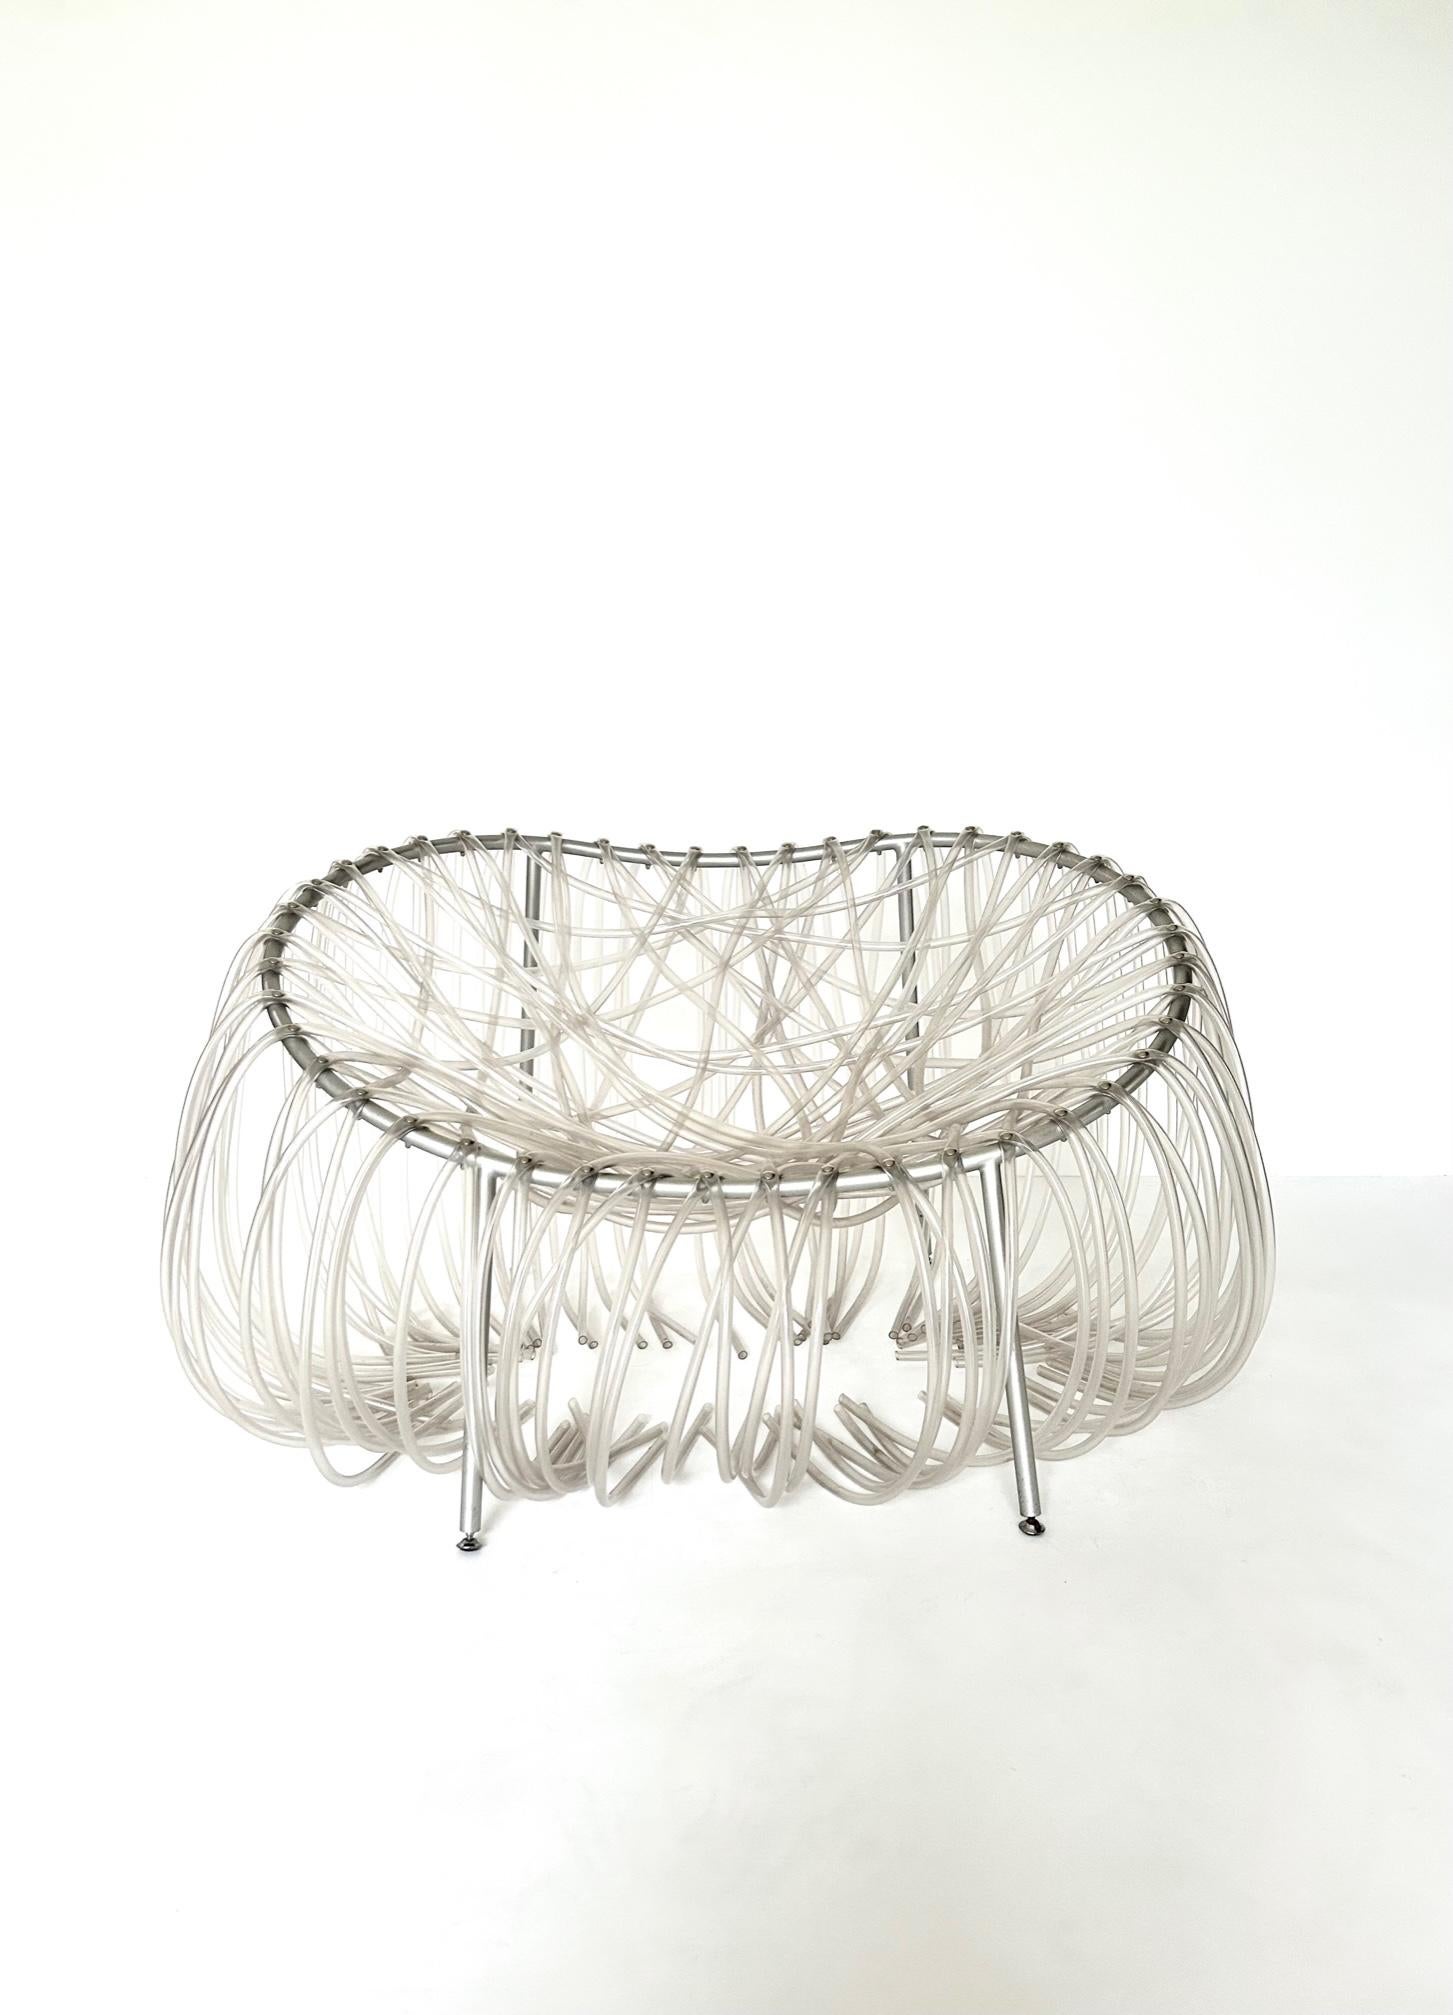 Fernando and Humberto Campana Anemone chair manufactured by Edra. Brazil/Italy, 2001. Special hollow tubes in plastic are handwoven methodically and screw-attached to the corolla-shaped frame in moulded metal, sanded and coated a metallic grey